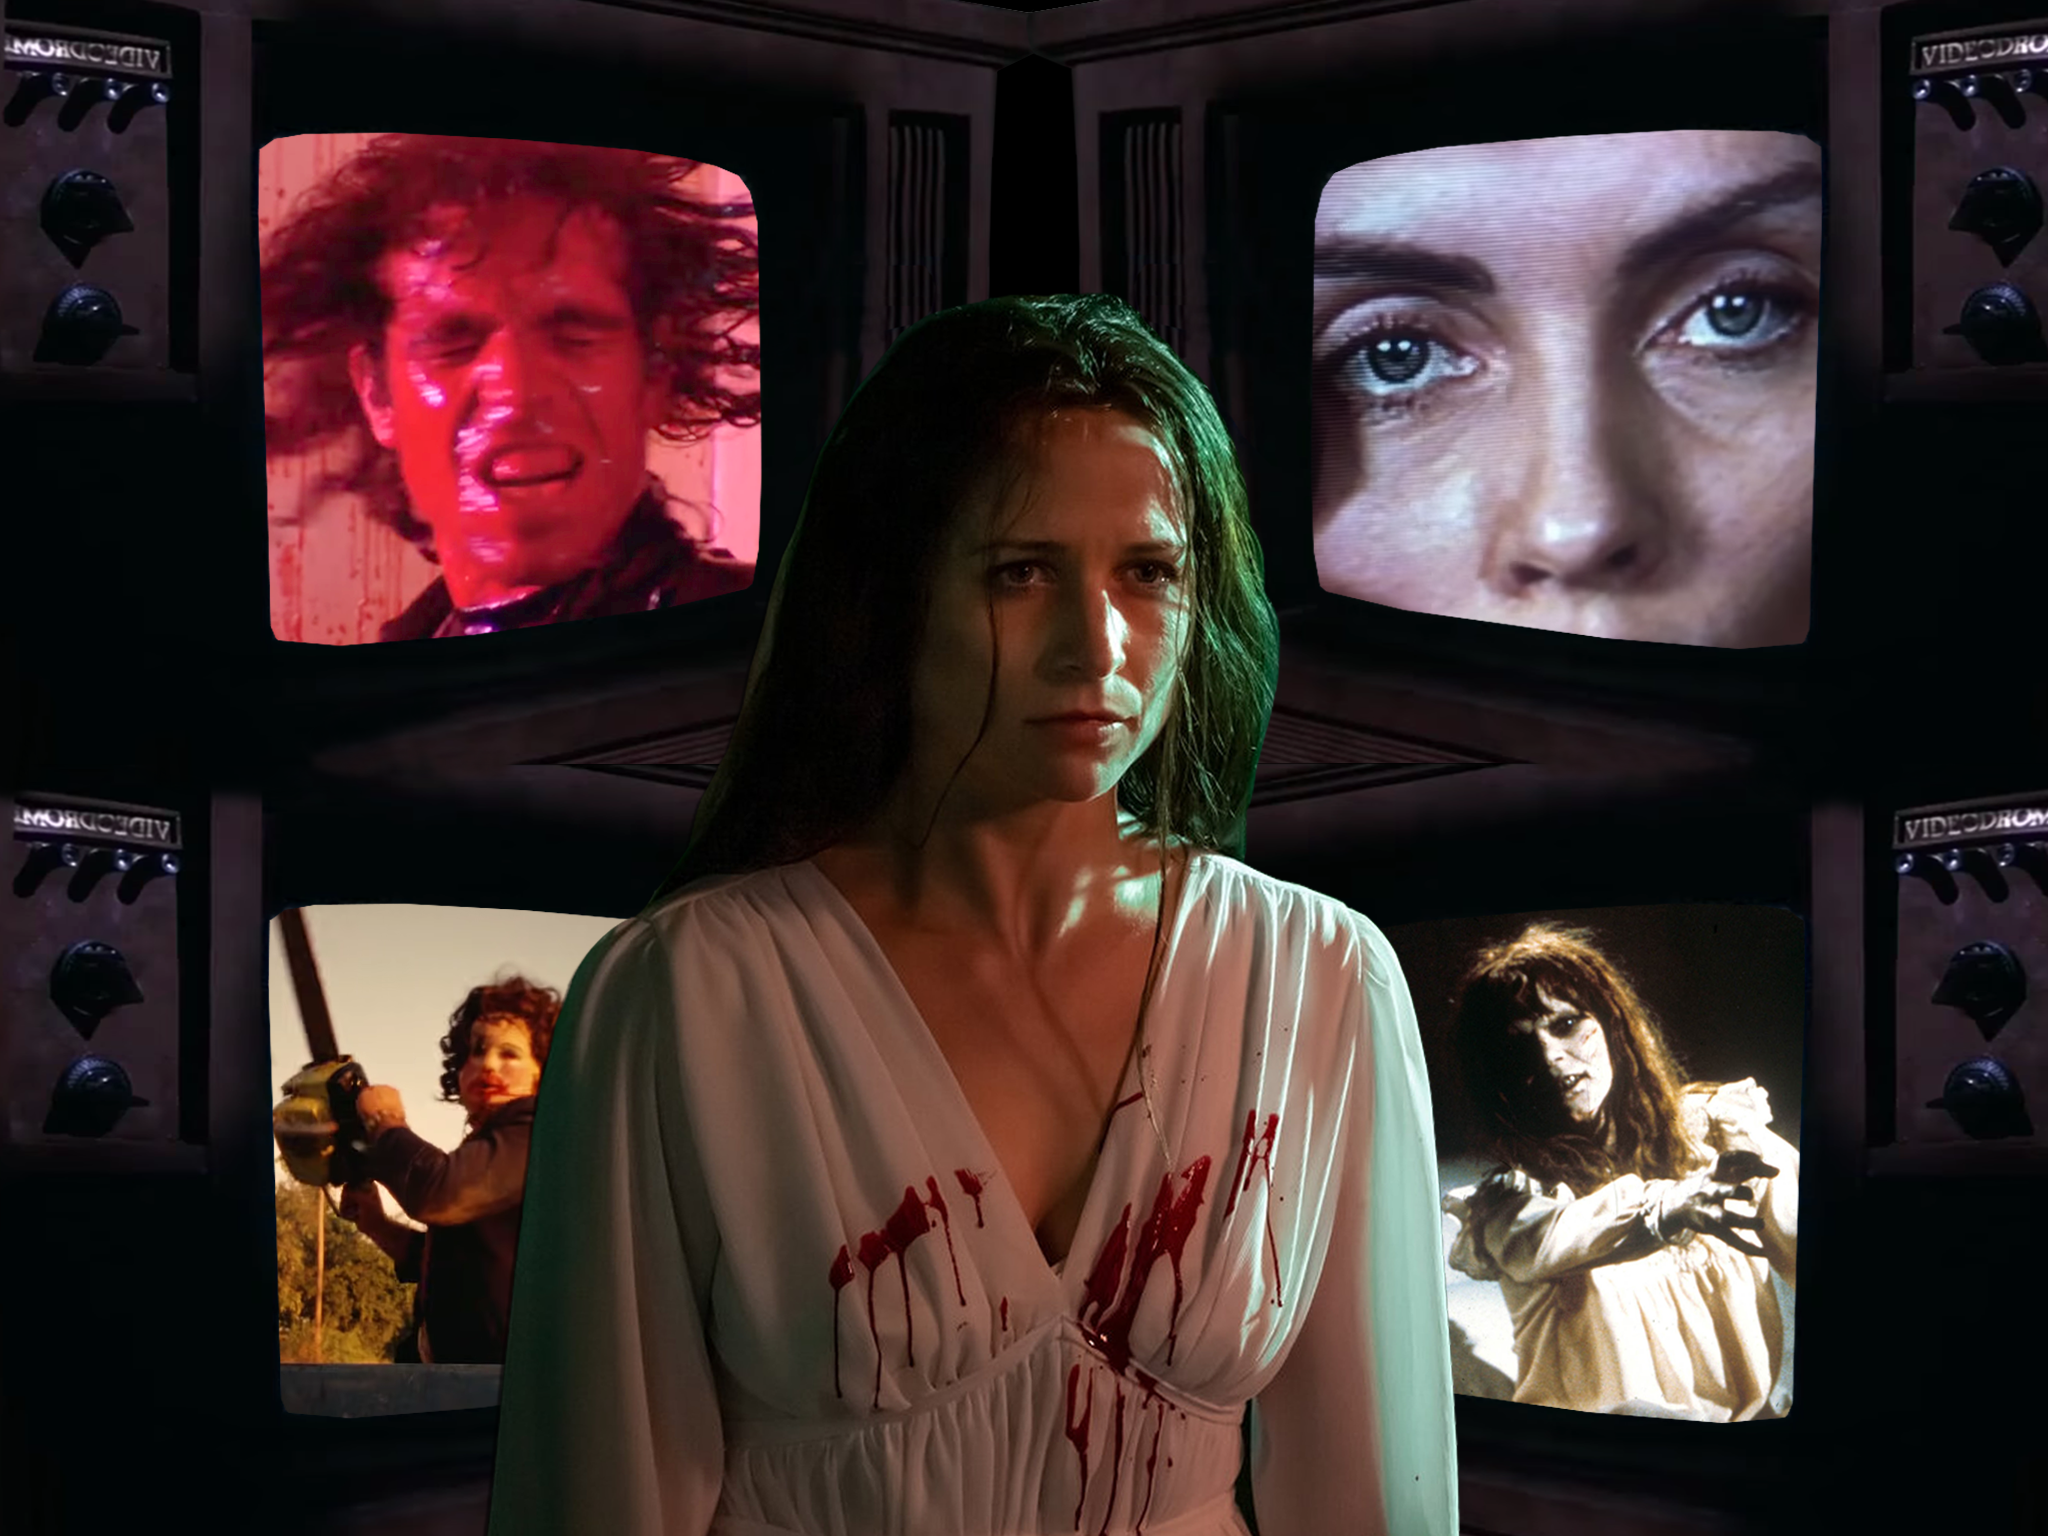 Niamh Algar in ‘Censor’ (centre), and scenes from (clockwise from top right) ‘Videodrome’, ‘The Exorcist’, ‘The Texas Chain Saw Massacre’ and ‘The Driller Killer'